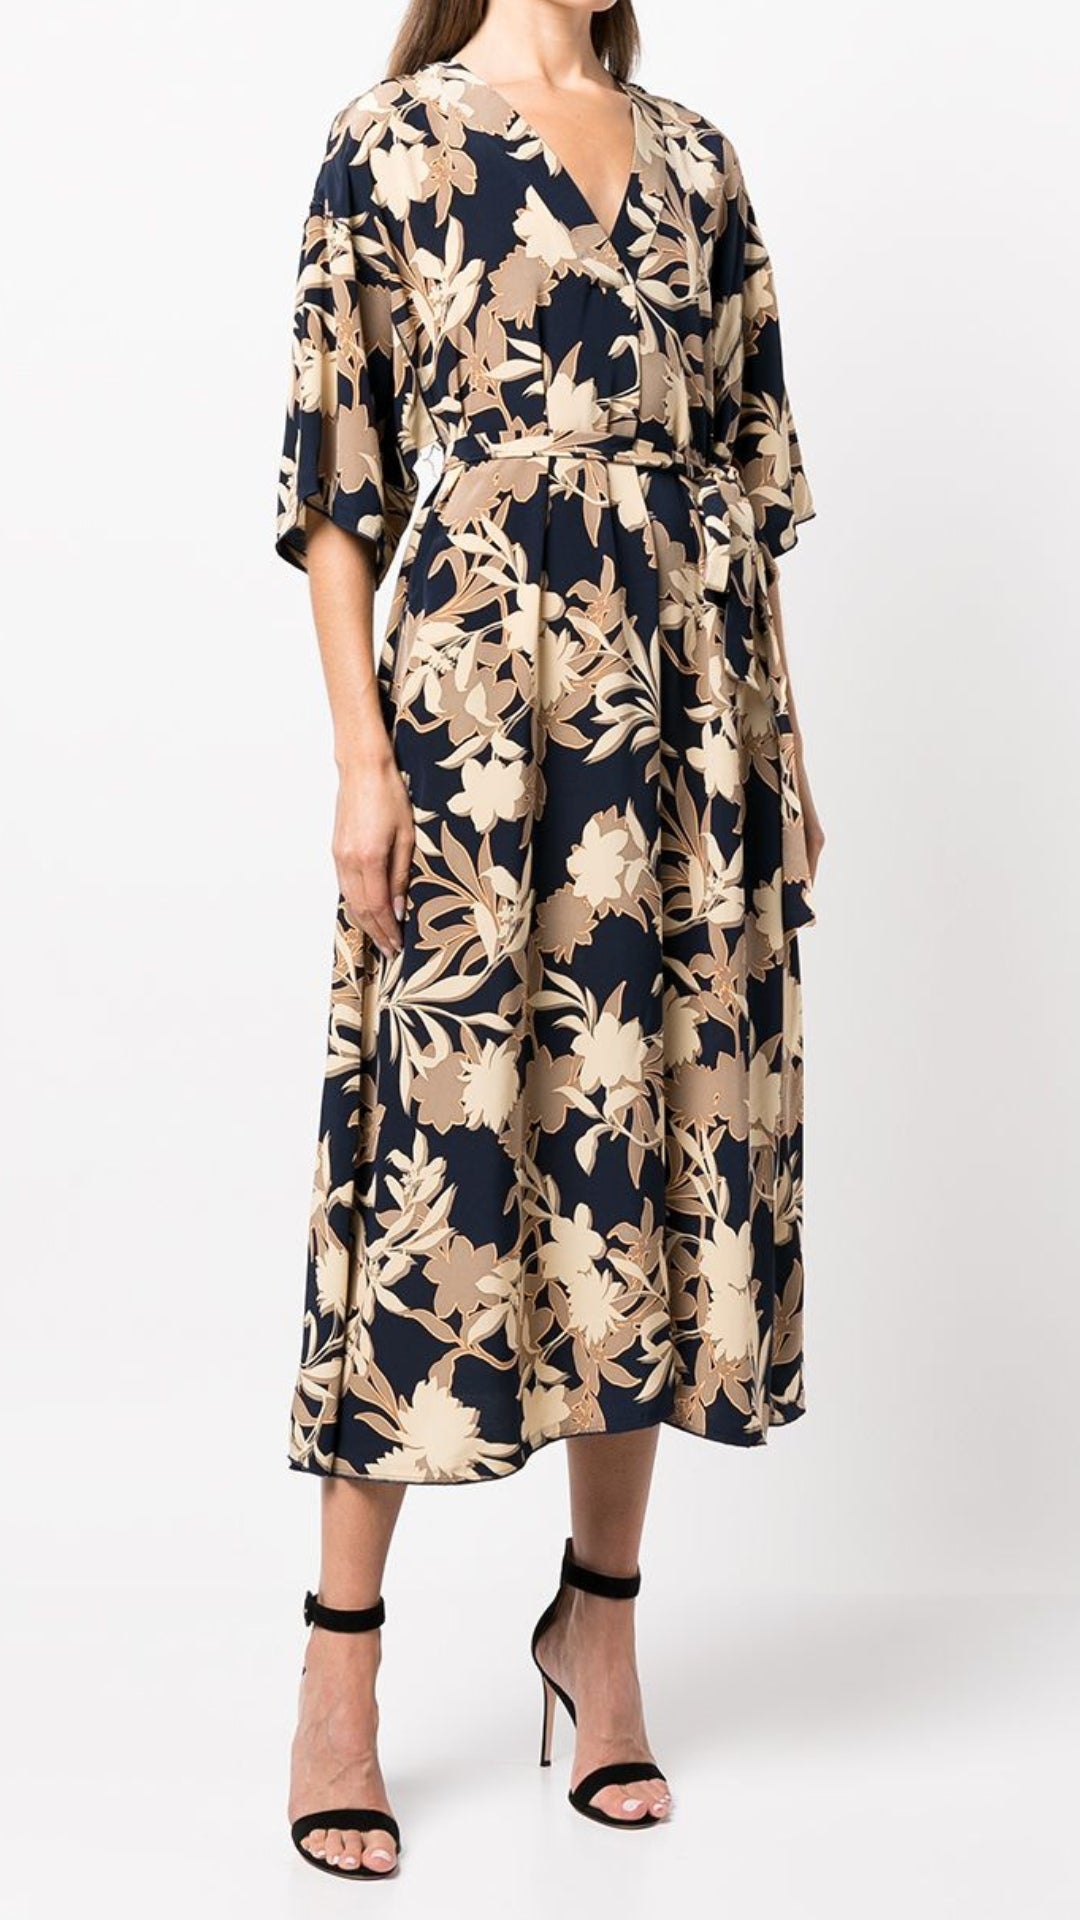 St John Knits Floral Print Silk Midi Dress. Kimono style dress in natural tones and navy blue. With a silk tie belt and half length sleeves. Midi length. Shown on model  facing front.